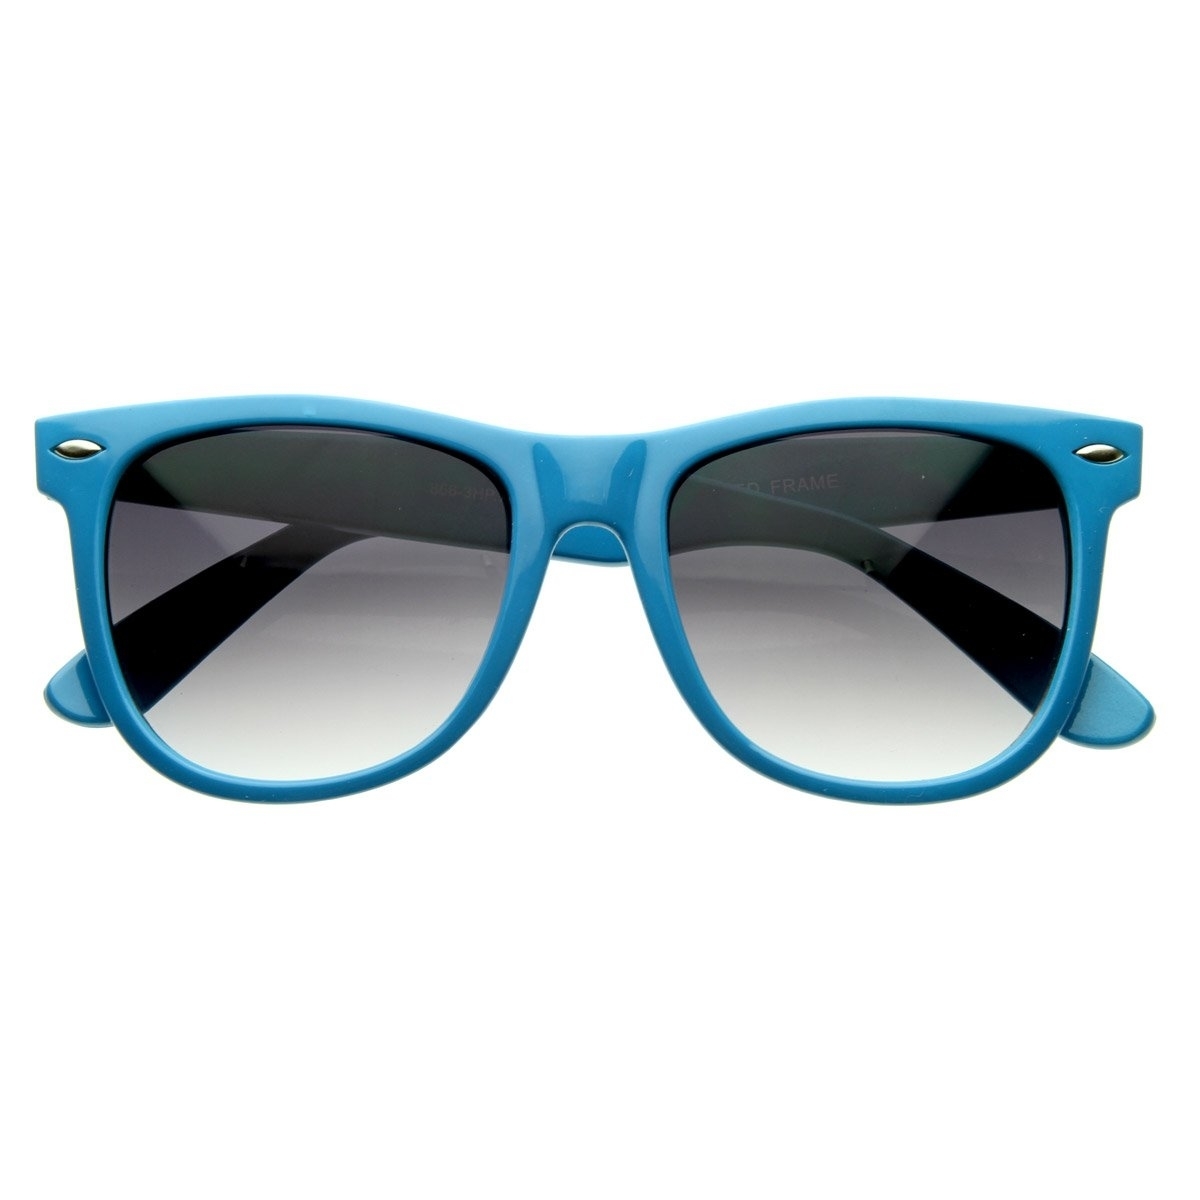 Large Classic Color Horn Rimmed Bright Retro Style Sunglasses - Blue